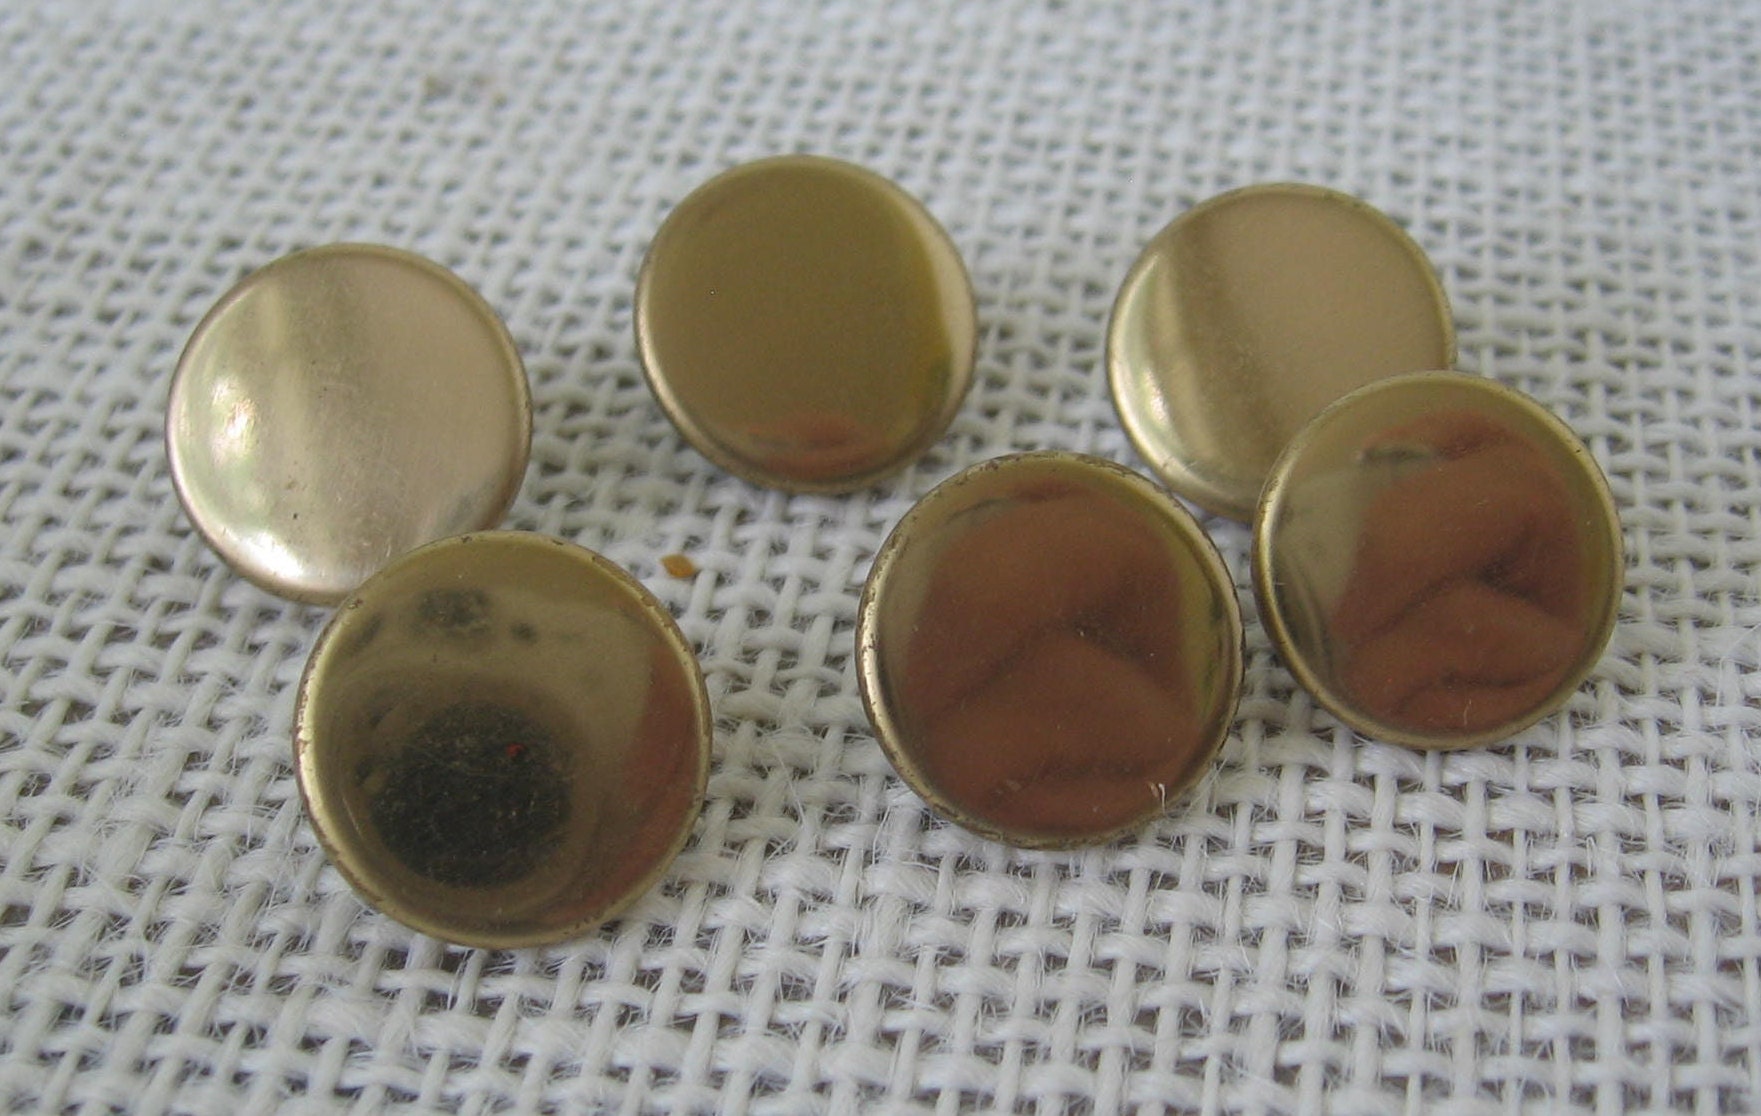 10 Blazer Buttons, Gold, Silver, Plain, Crest, Mother of Pearl MOP, Wood,  Metal, Domed, Flat, High Quality, Suit Set of 11 Buttons 